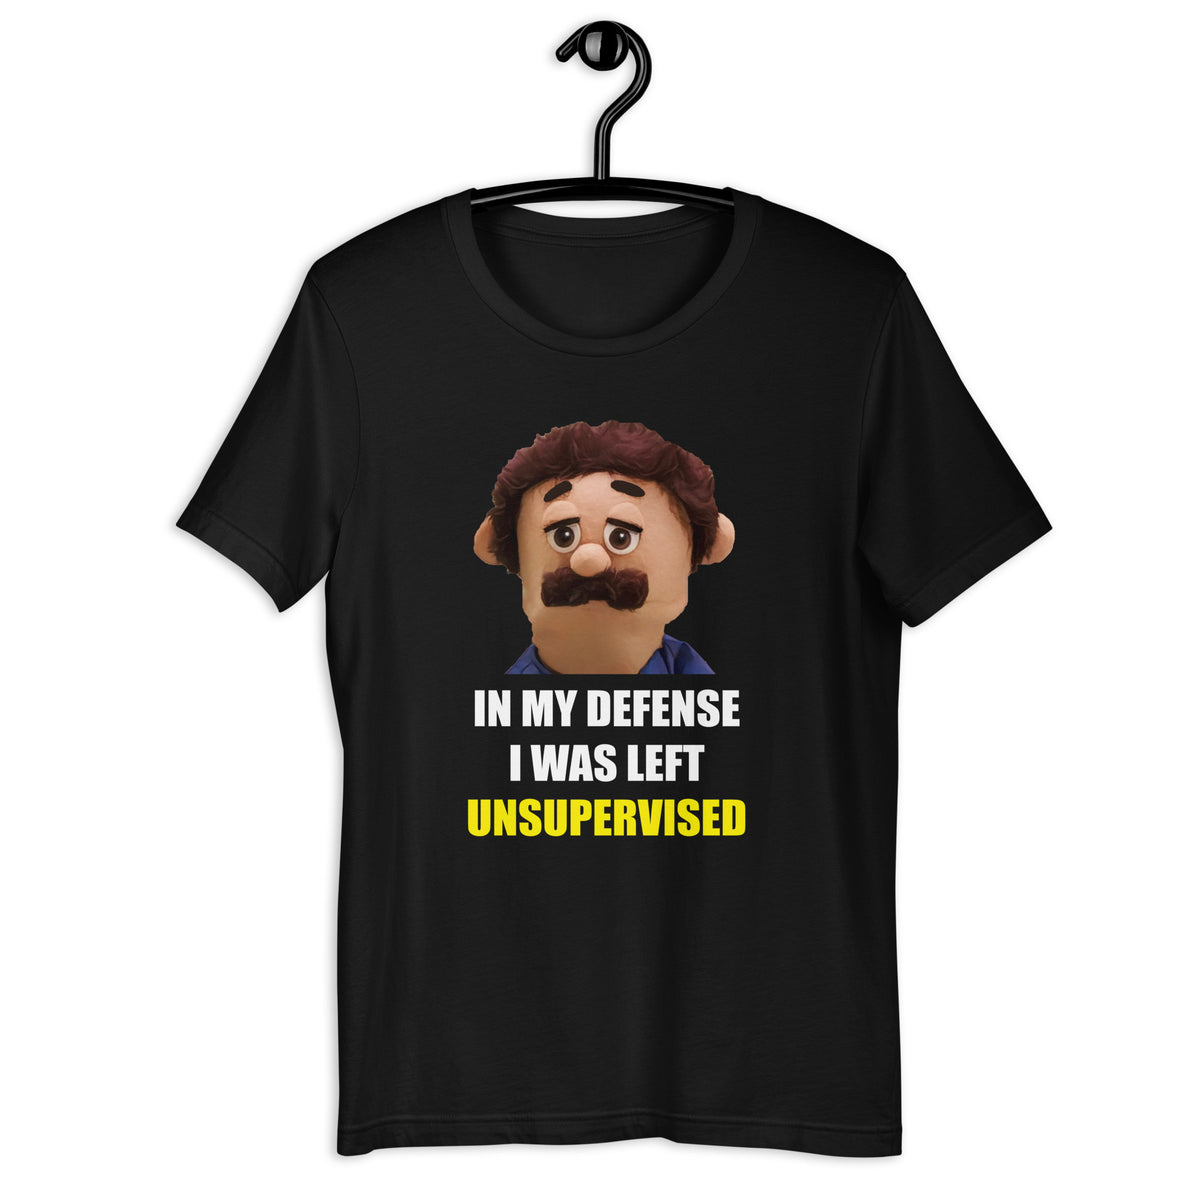 Puppet Diego for sale In My Defence I Was Left Unsupervised t-shirt - SHOPNOO